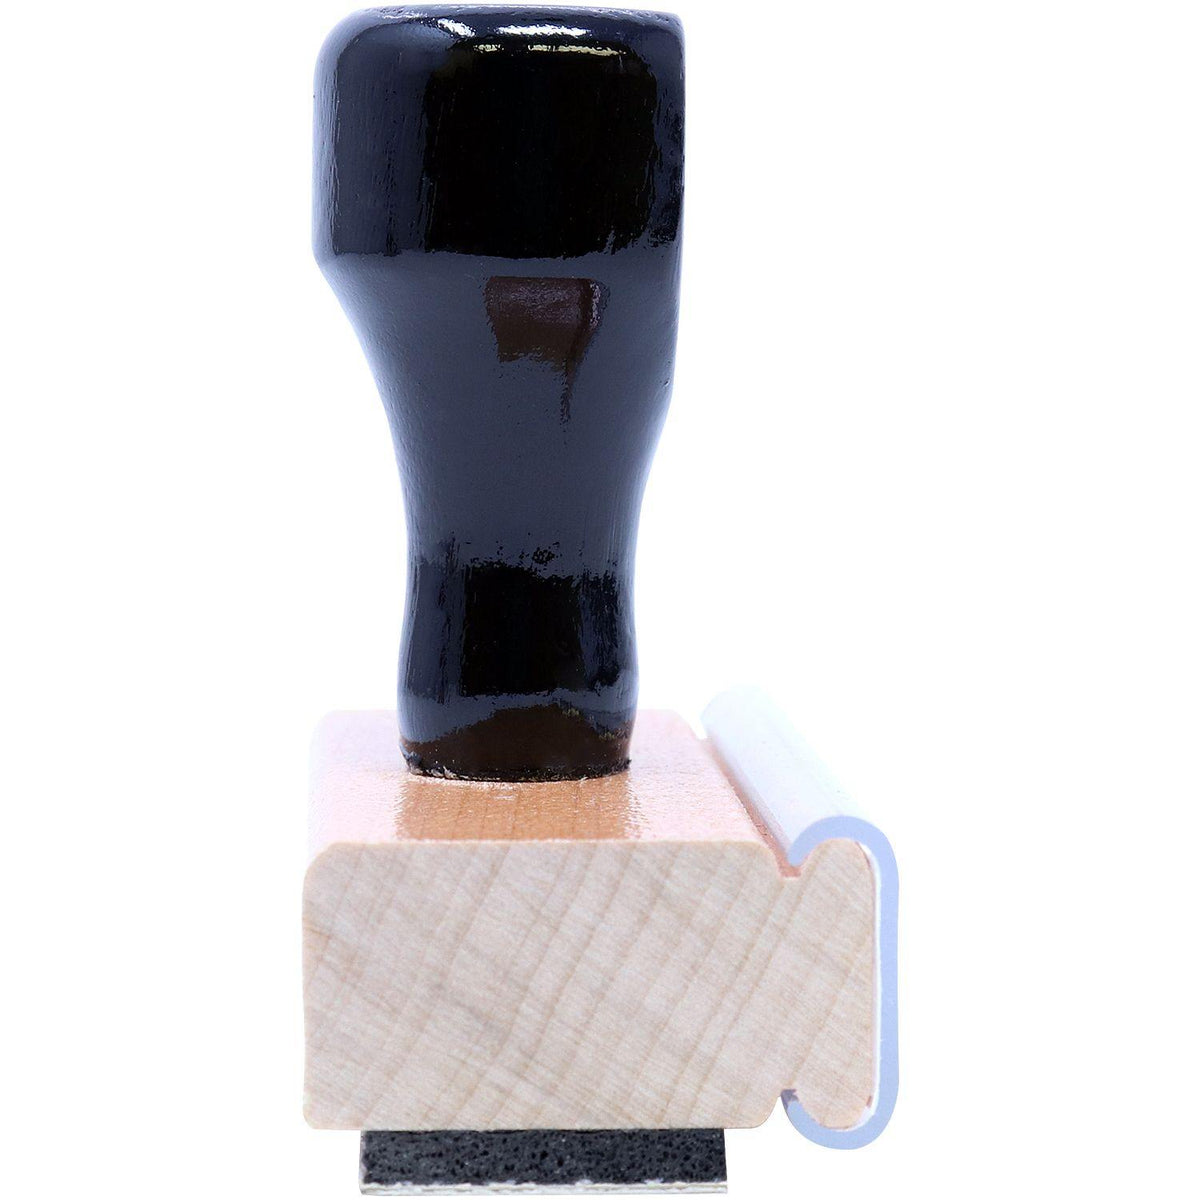 Side View of Large Certified Copy Rubber Stamp